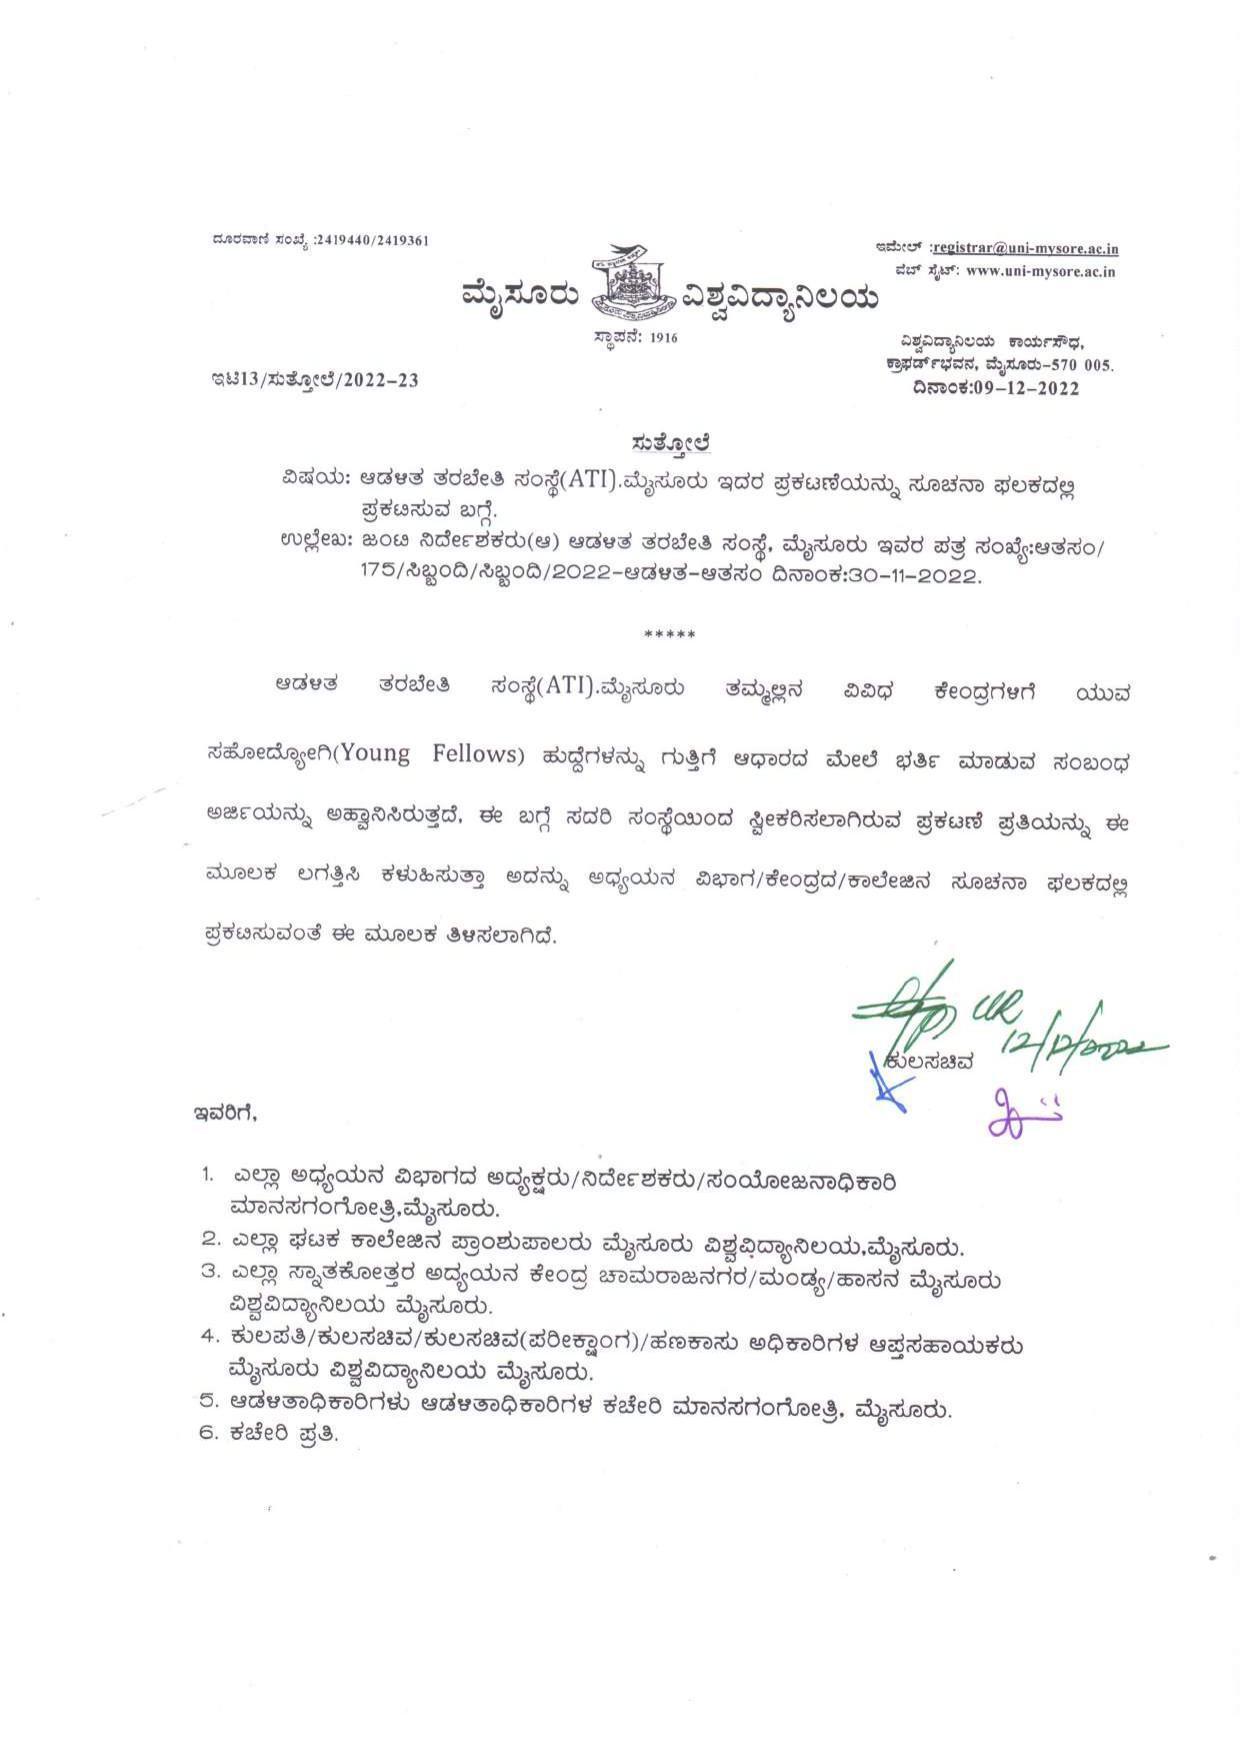 University of Mysore Invites Application for 10 Young Fellow Recruitment 2022 - Page 3